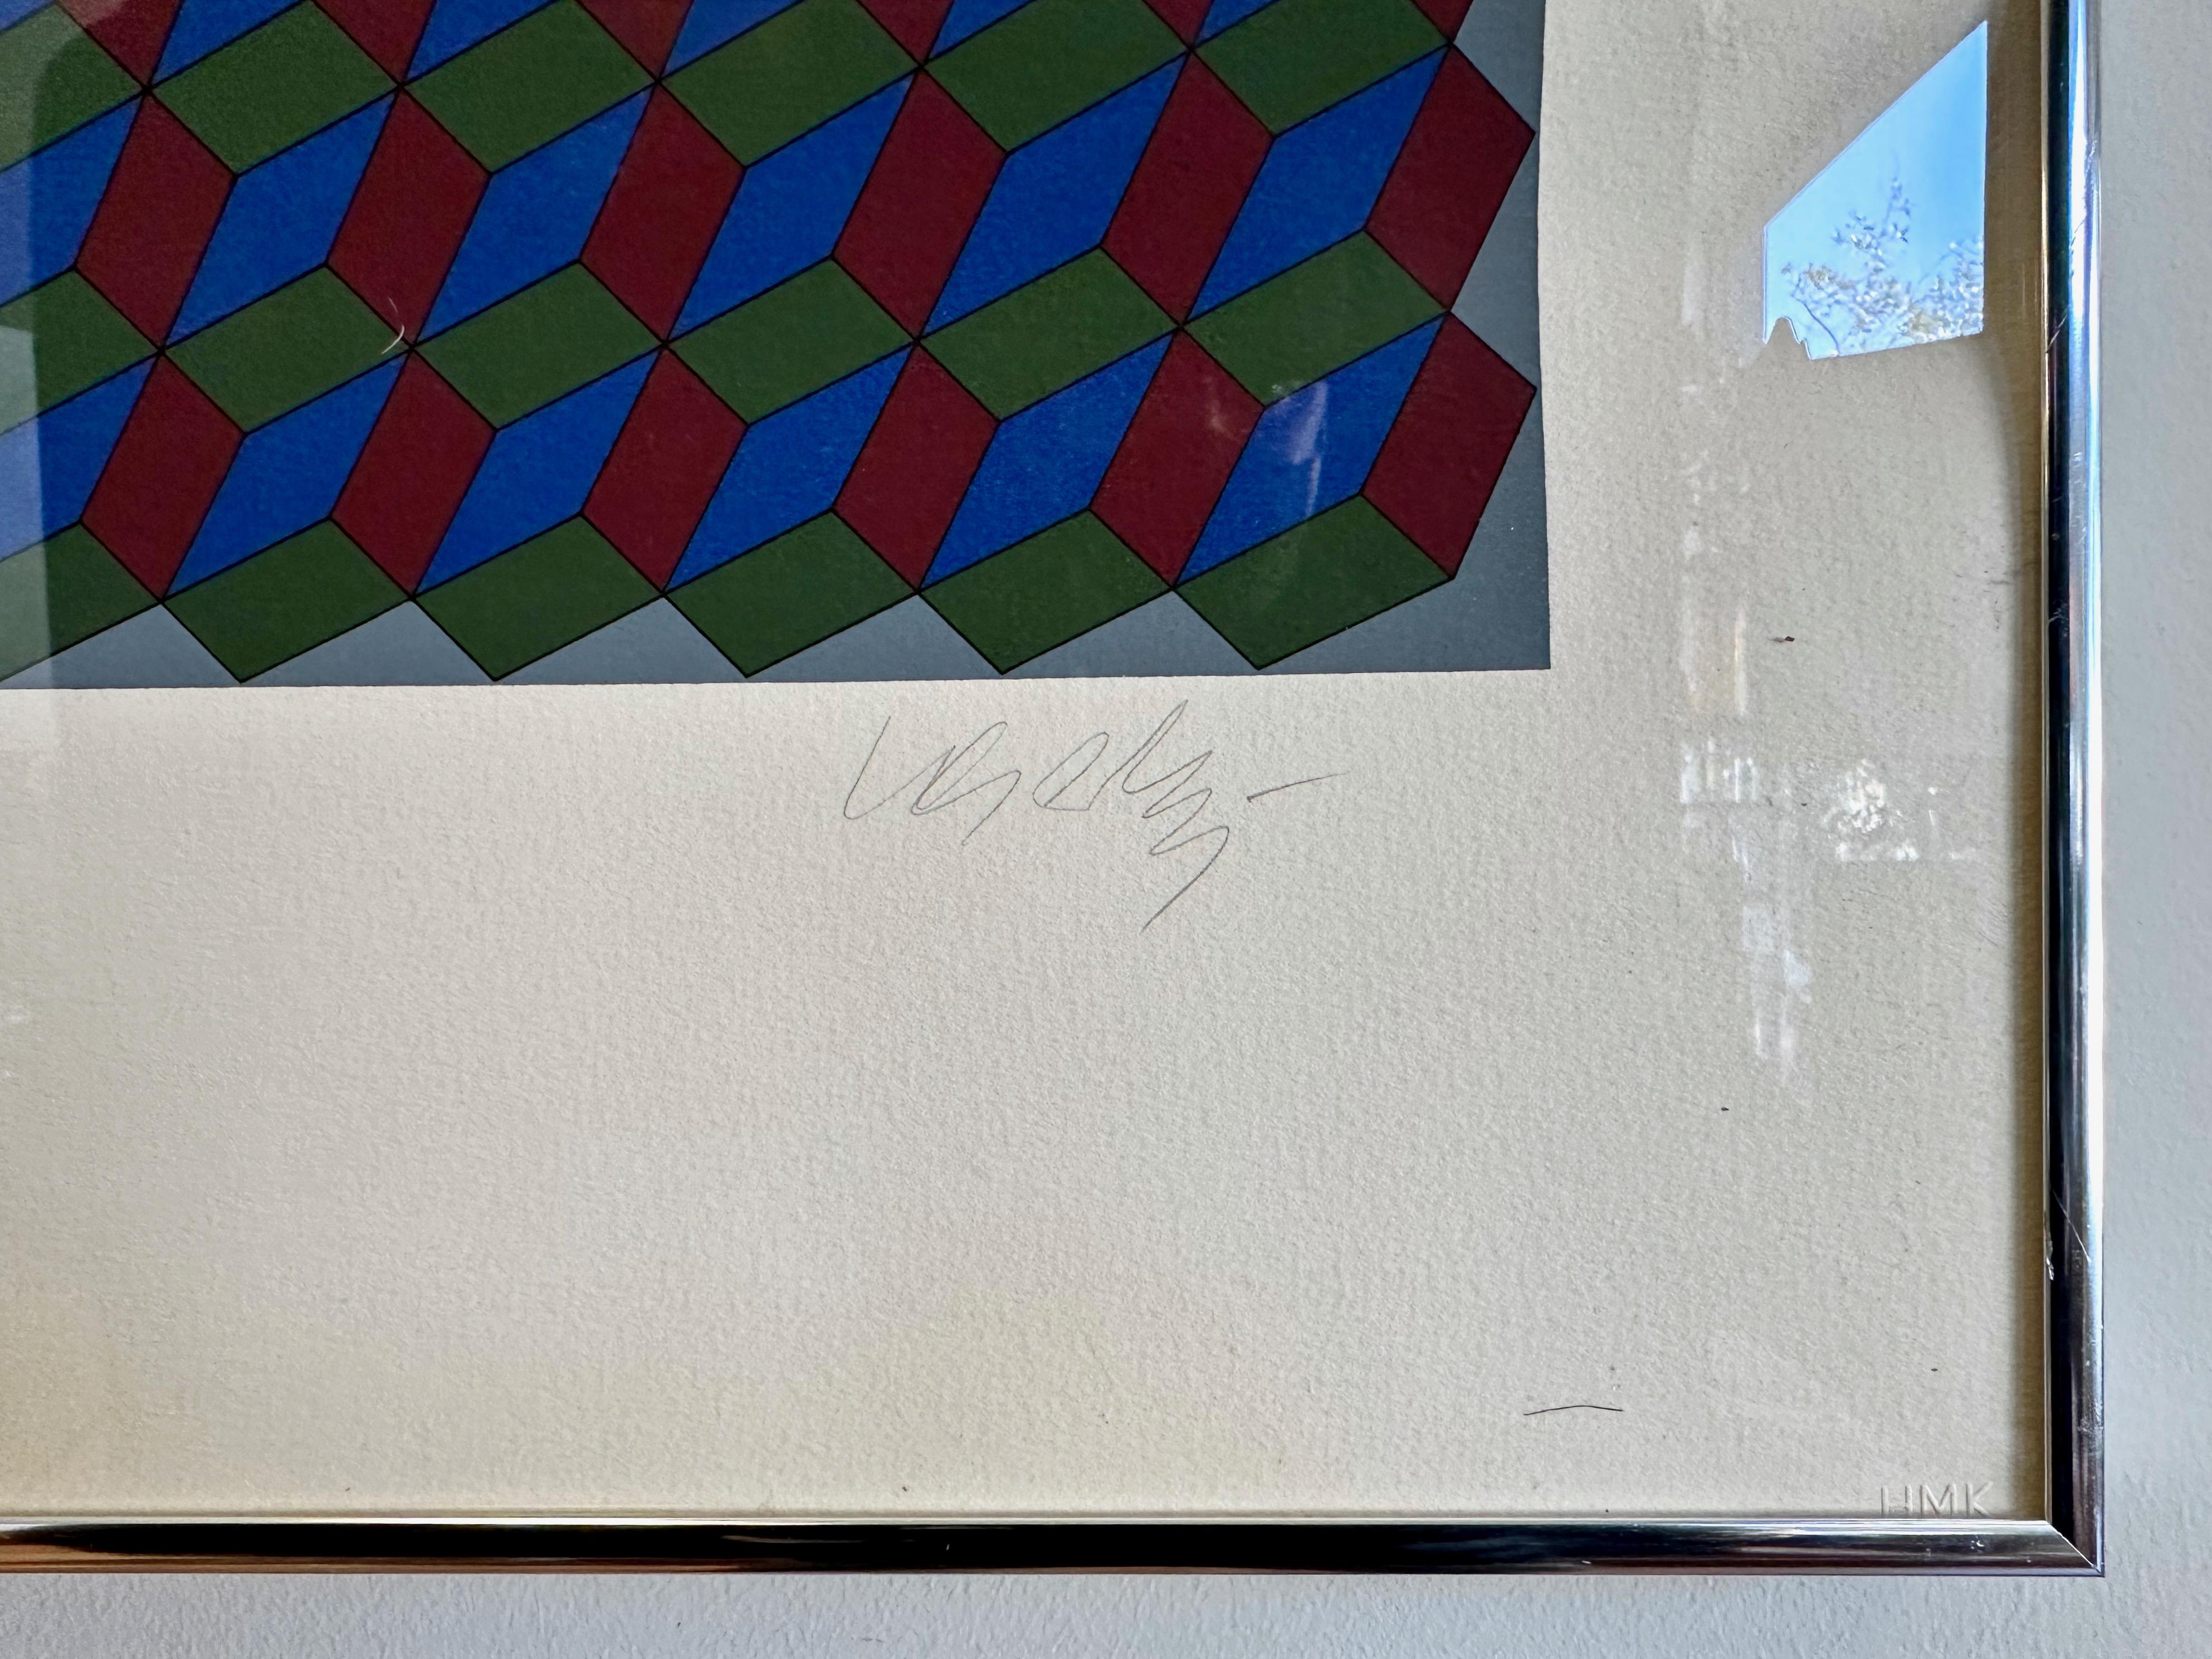 Brushed Victor Vasarely, “Torony III”, Op Art Serigraph, Signed and Numbered, 1970s For Sale